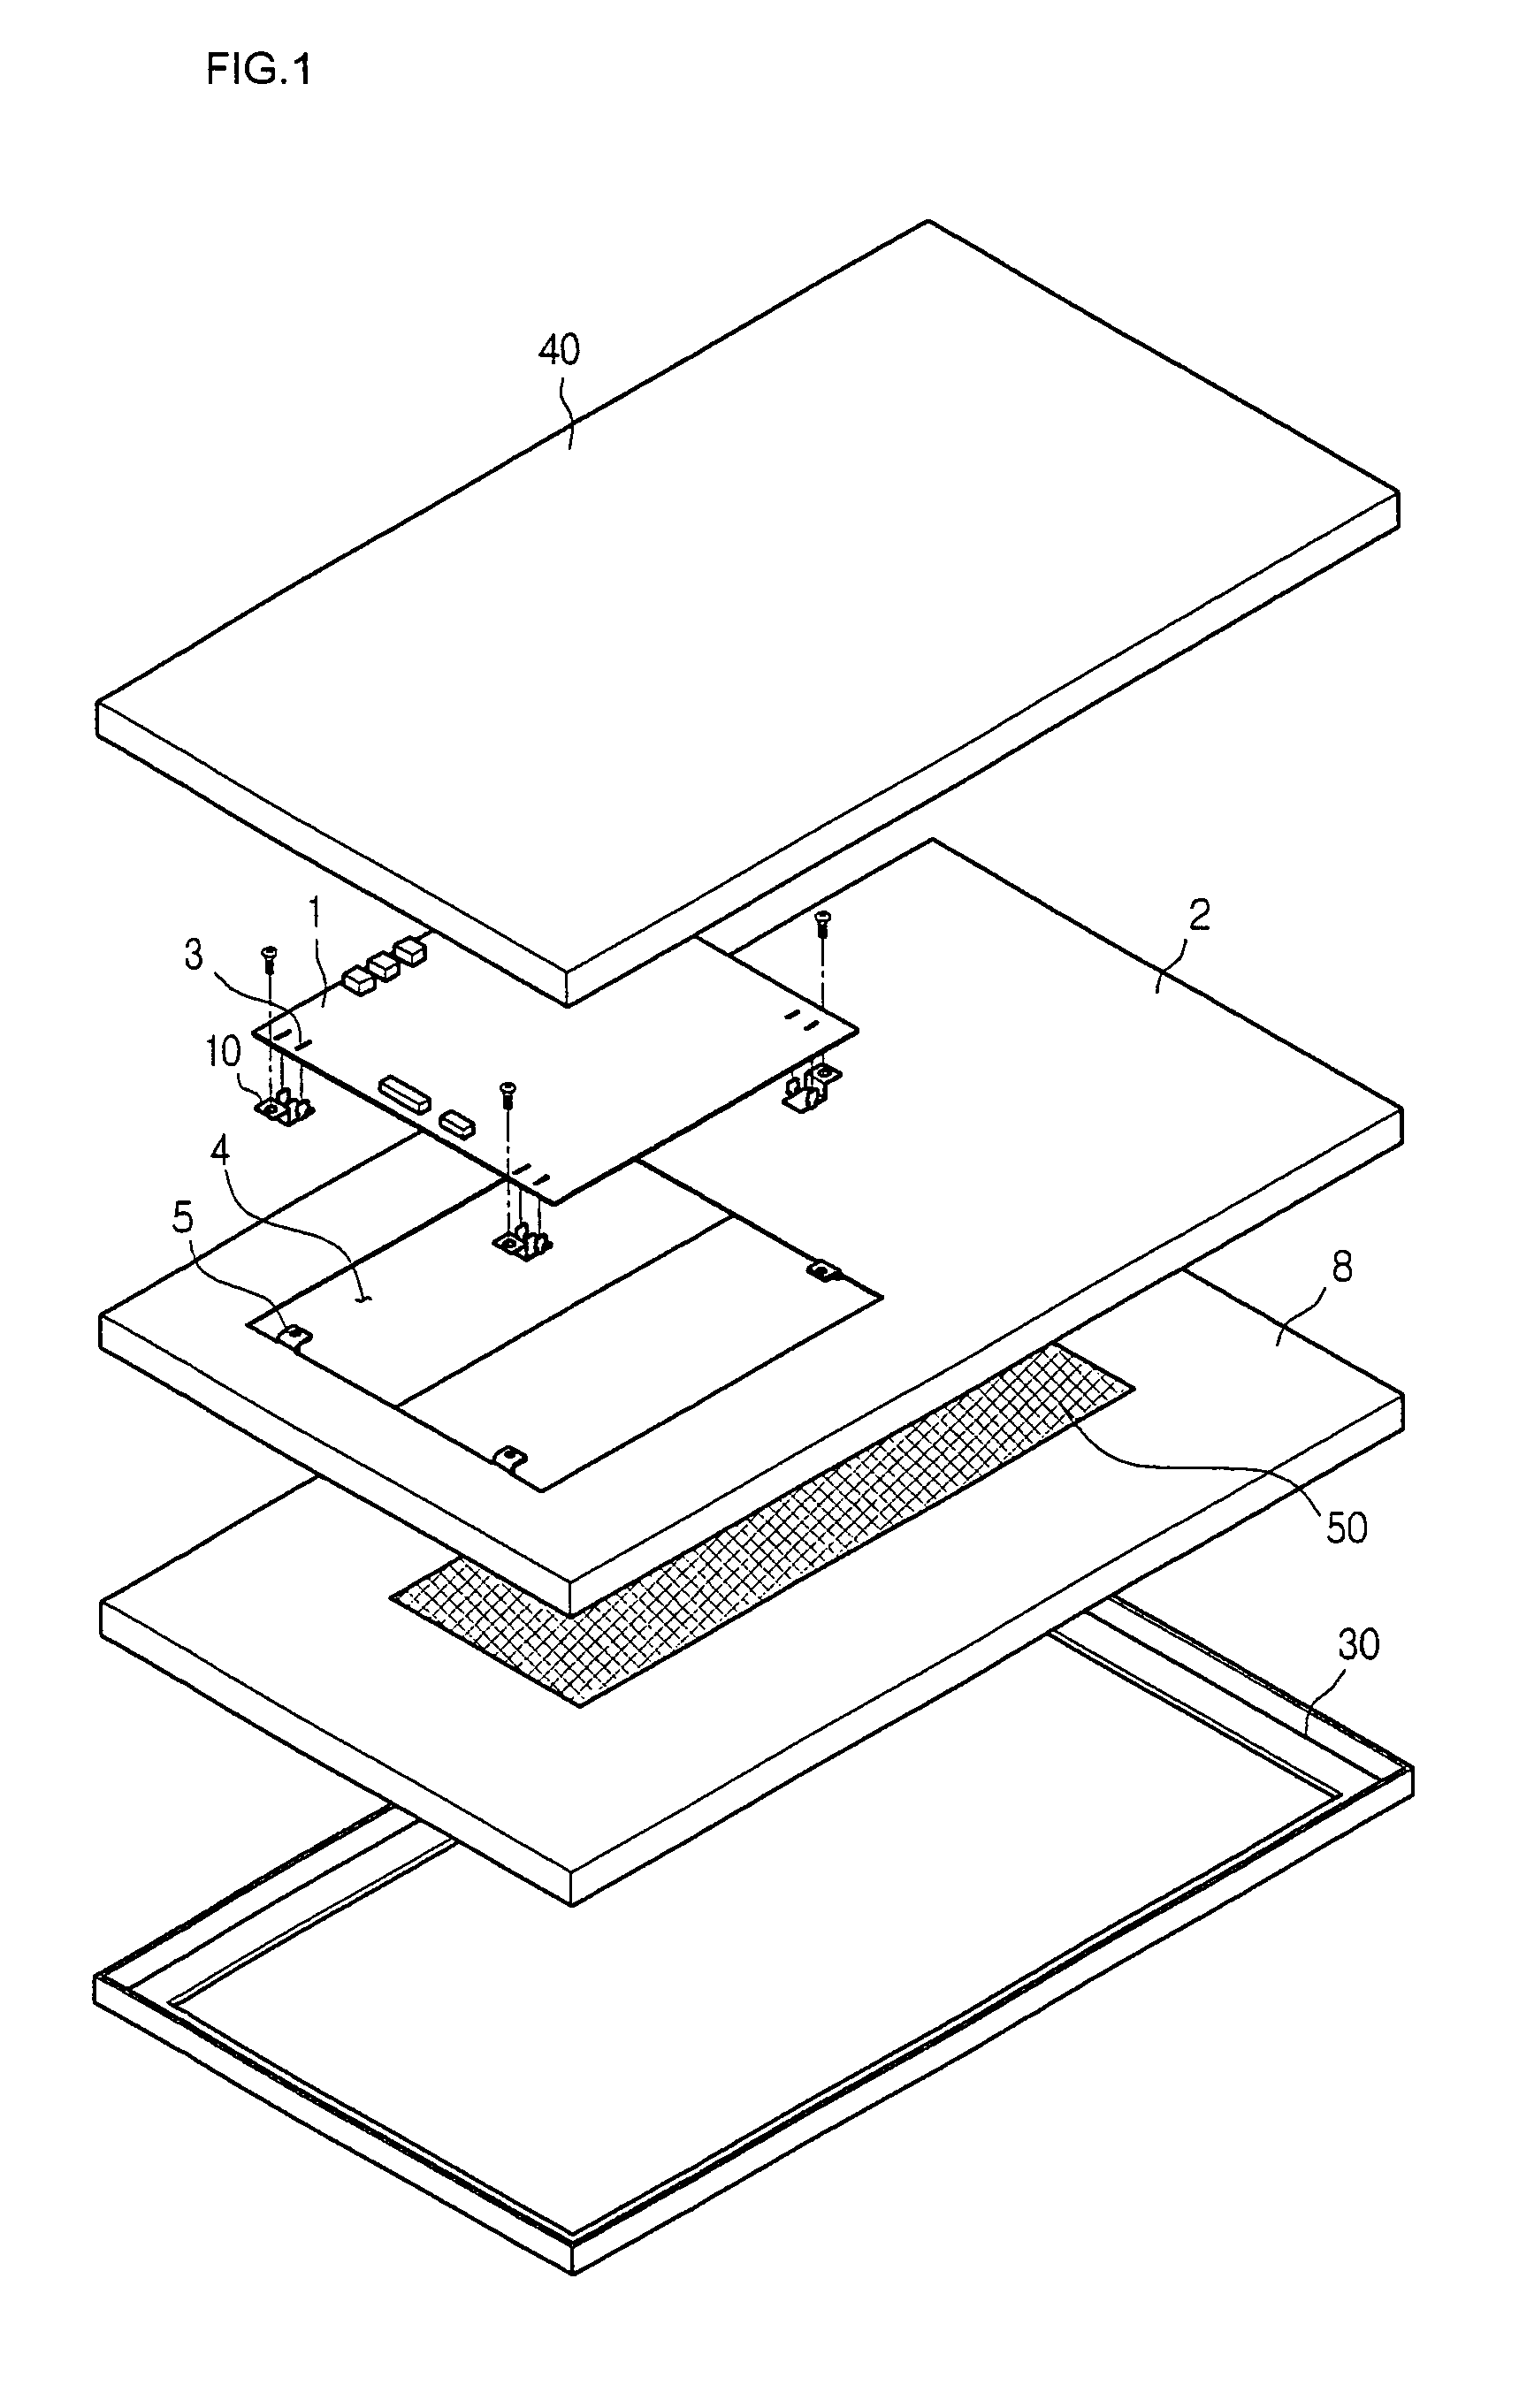 Display device and board supporting structure